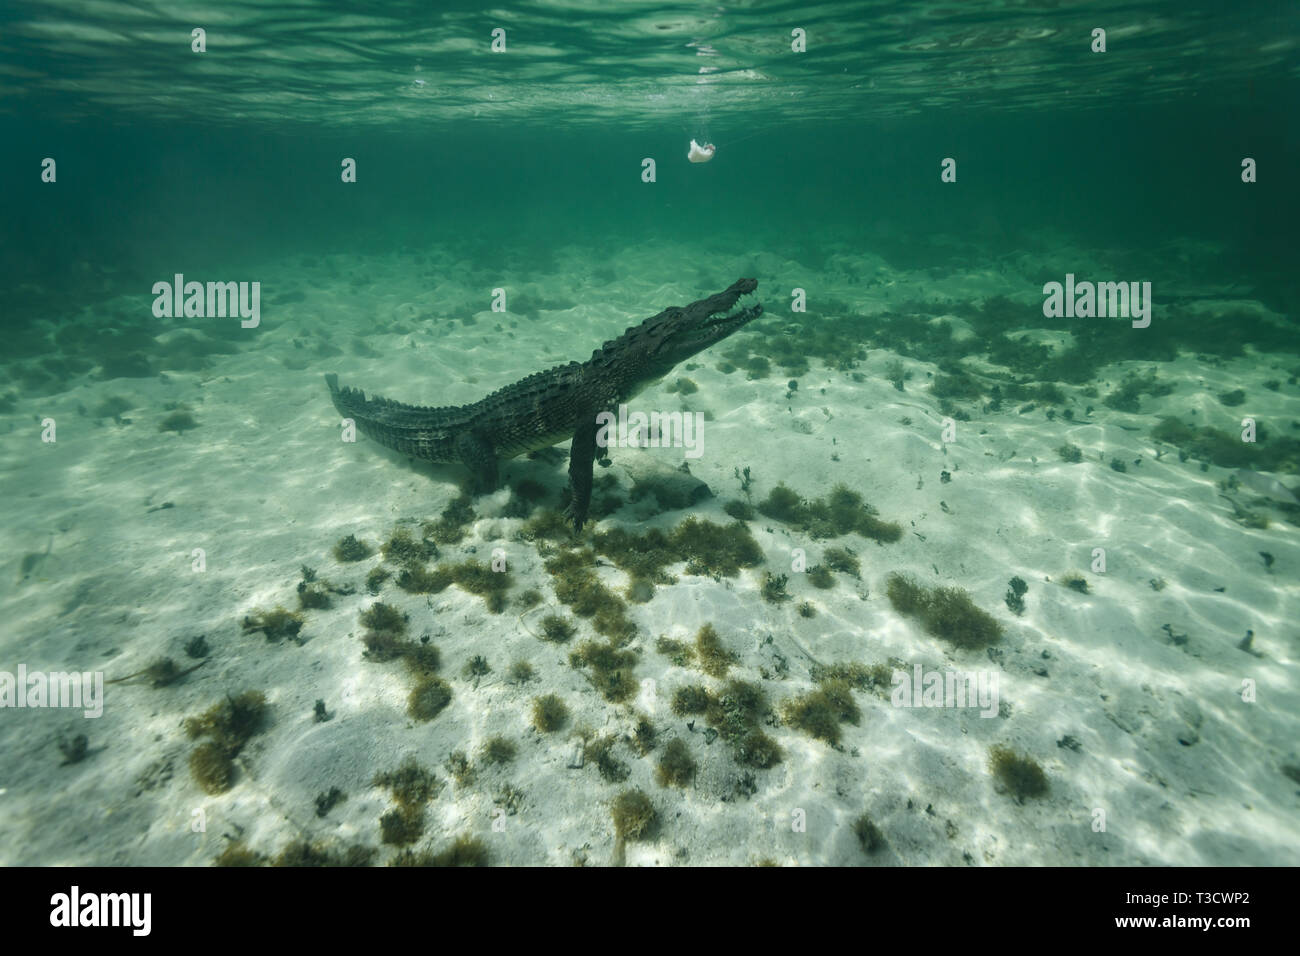 Closeup of side of an American crocodile, Crocodylus acutus, launching off the ocean bottom at a white fish Stock Photo